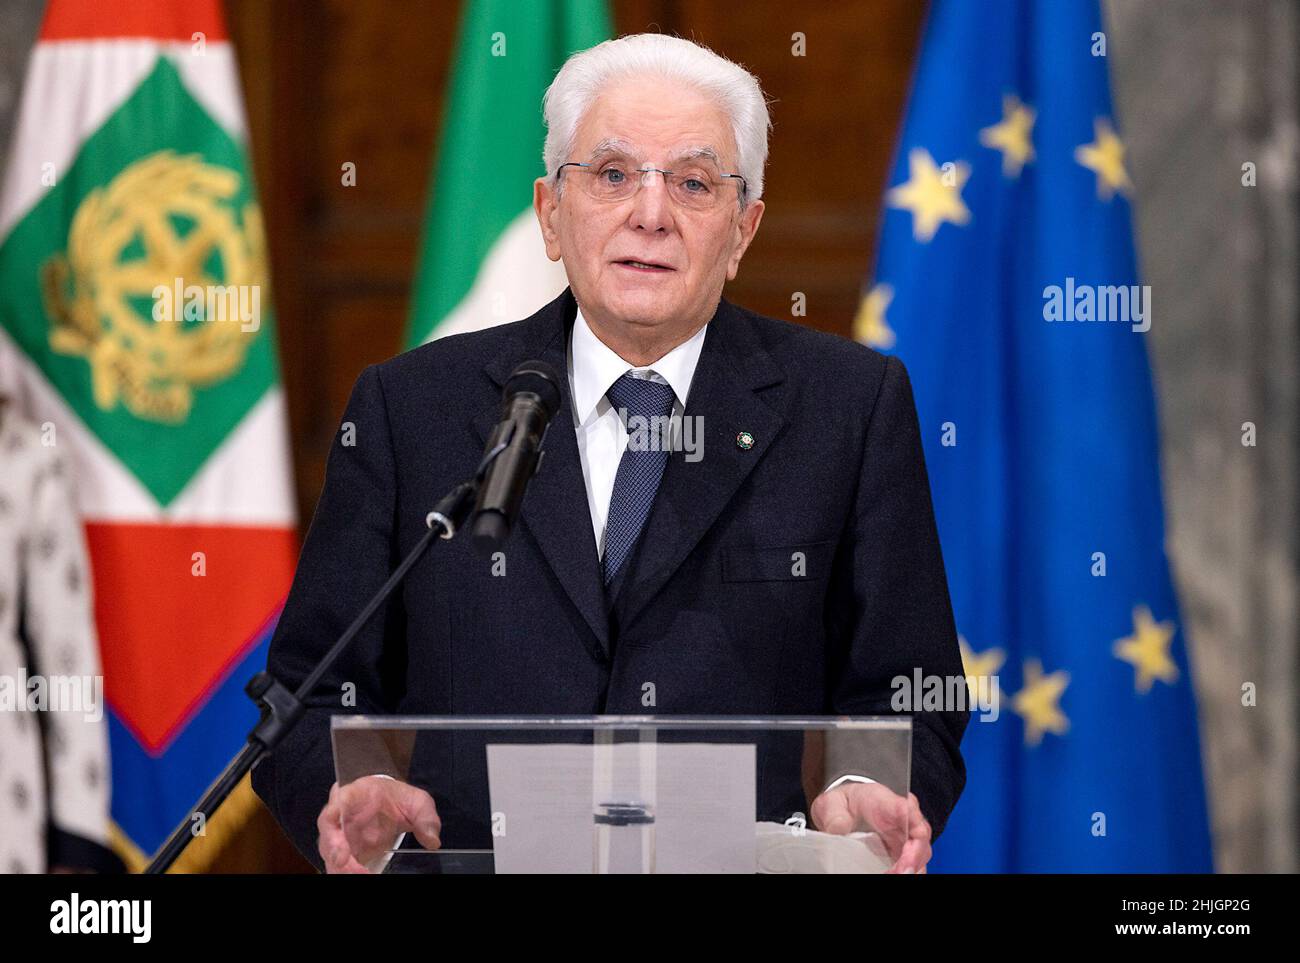 Rome, Italy. 29th Jan, 2022. Italian President Sergio Mattarella makes a declaration after receiving the official notice of his re-election at the Quirinale presidential palace in Rome, Italy, on Jan. 29, 2022. Italian President Sergio Mattarella was elected to a second term, Lower House Speaker Roberto Fico announced late Saturday, after the parliament gathered in a joint session and concluded its eighth round of voting. Credit: Str/Xinhua/Alamy Live News Stock Photo